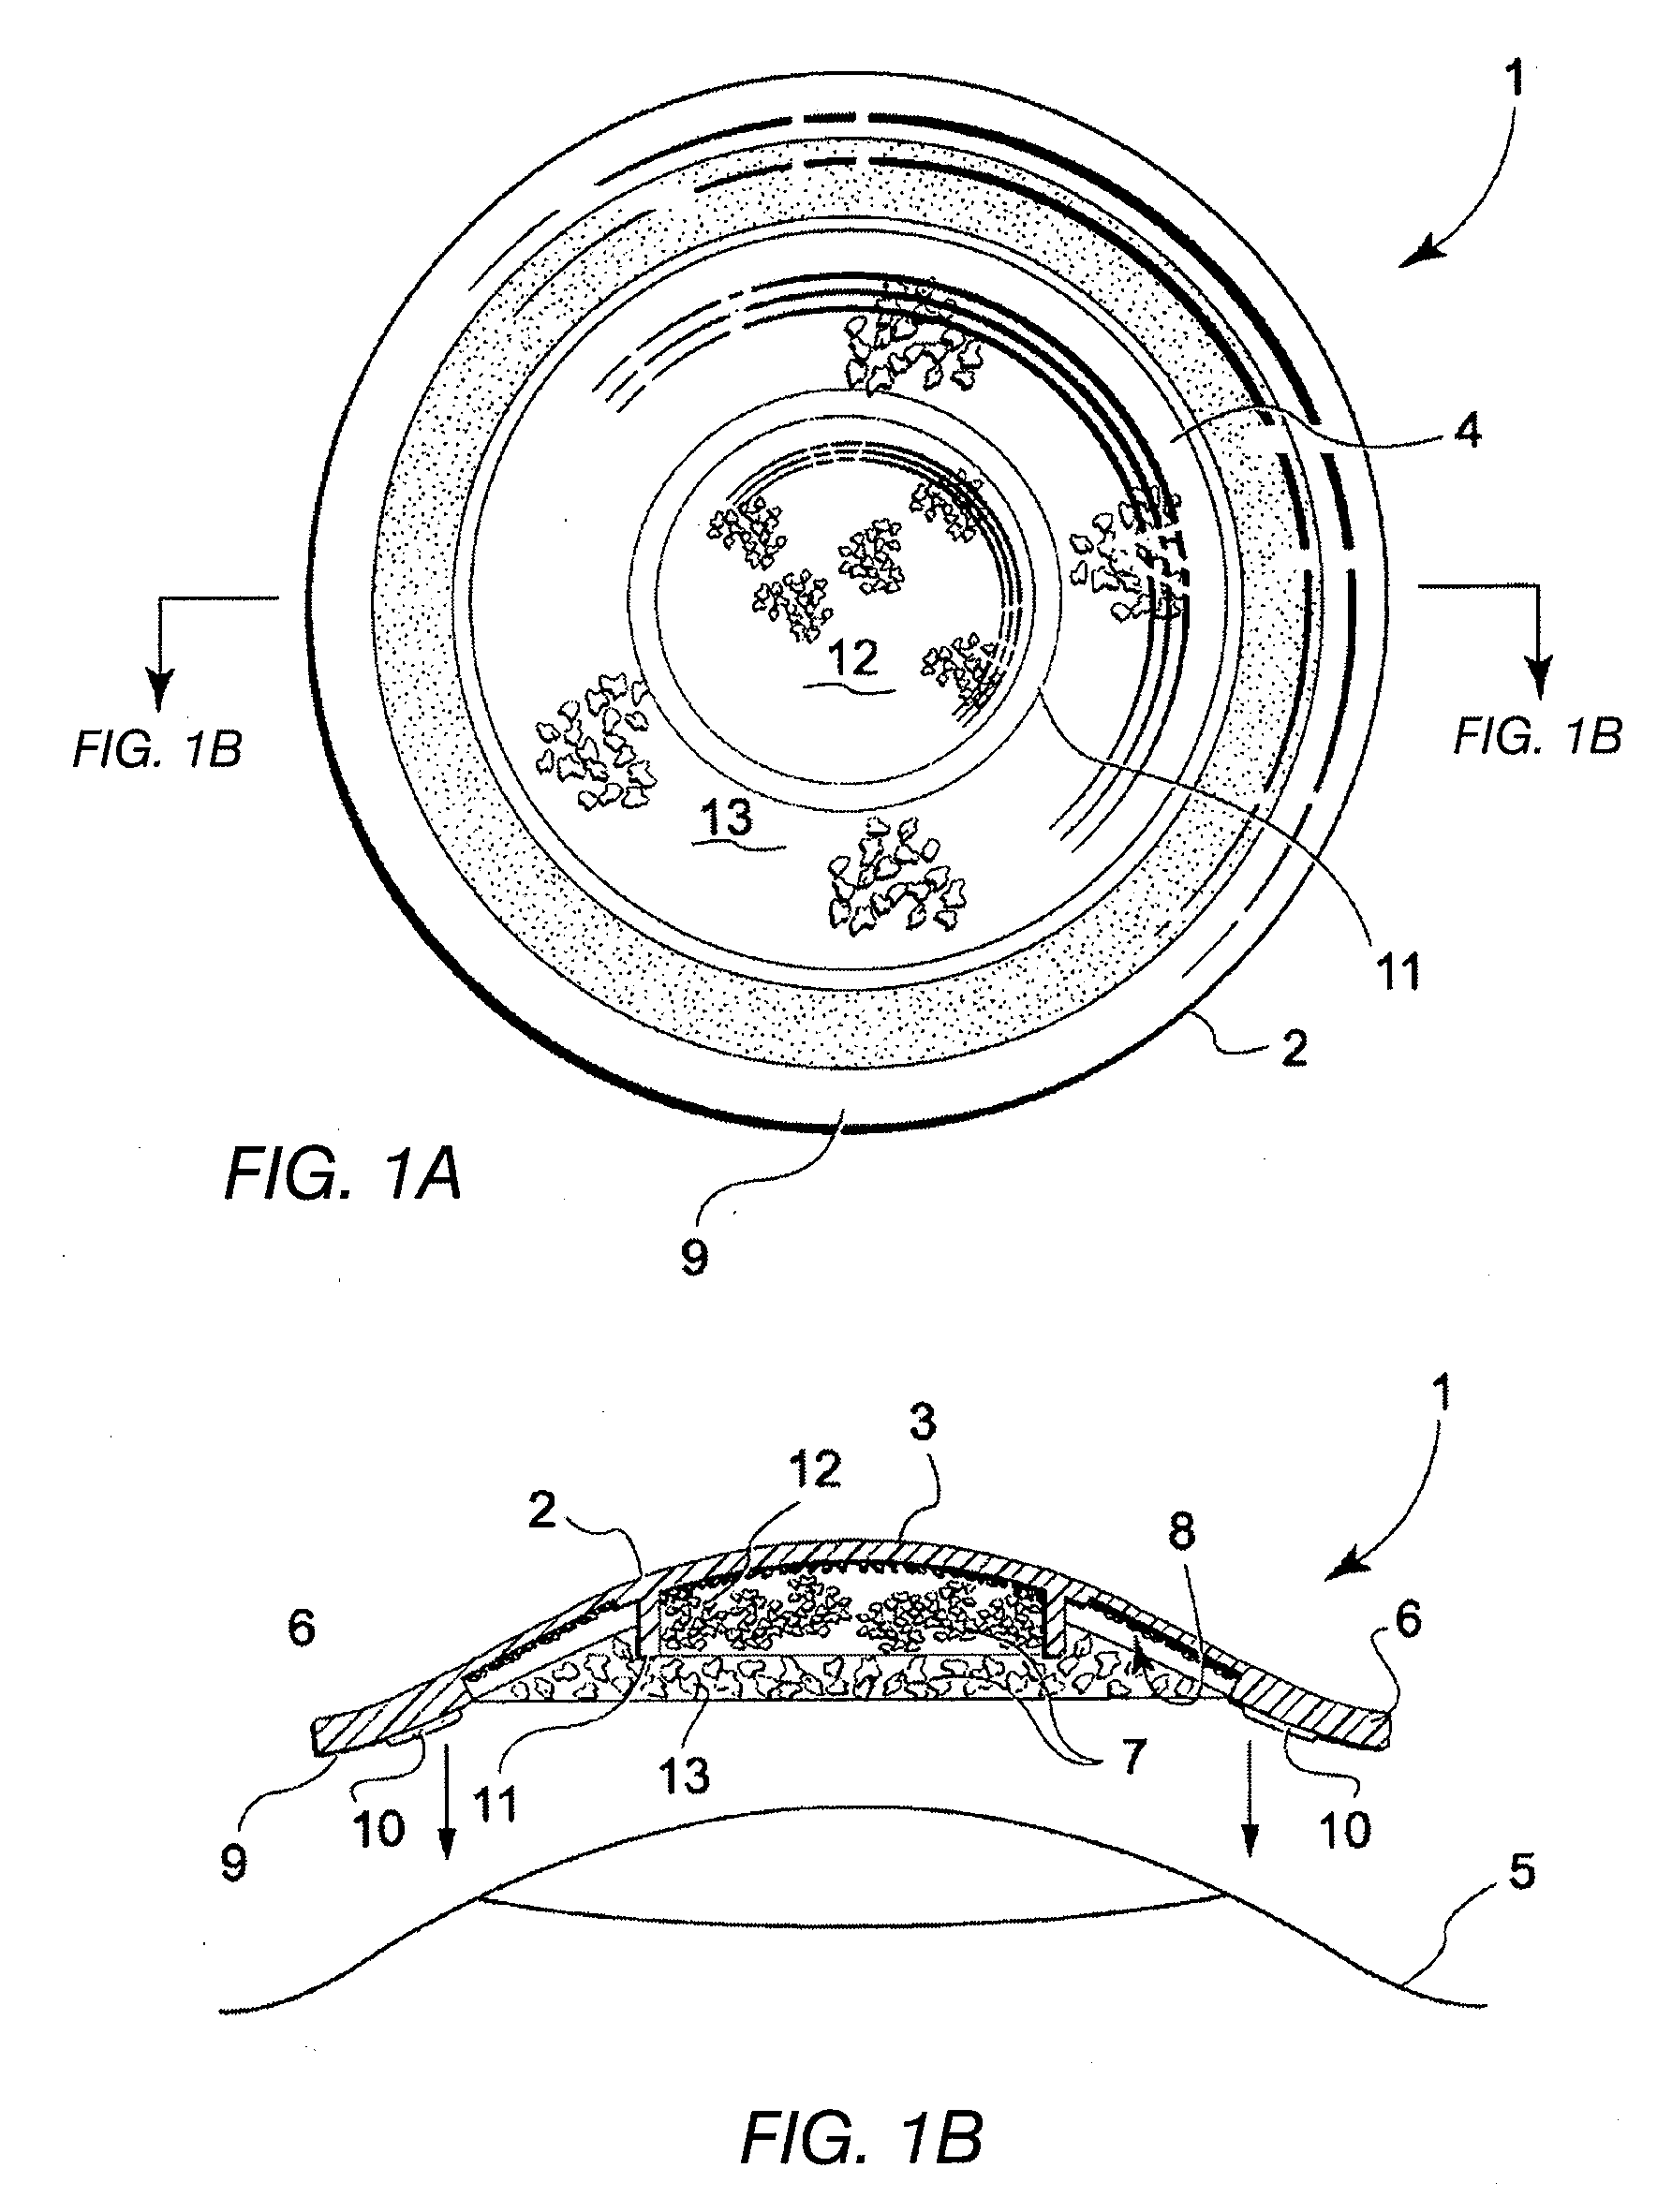 Cultured tissue transplant device